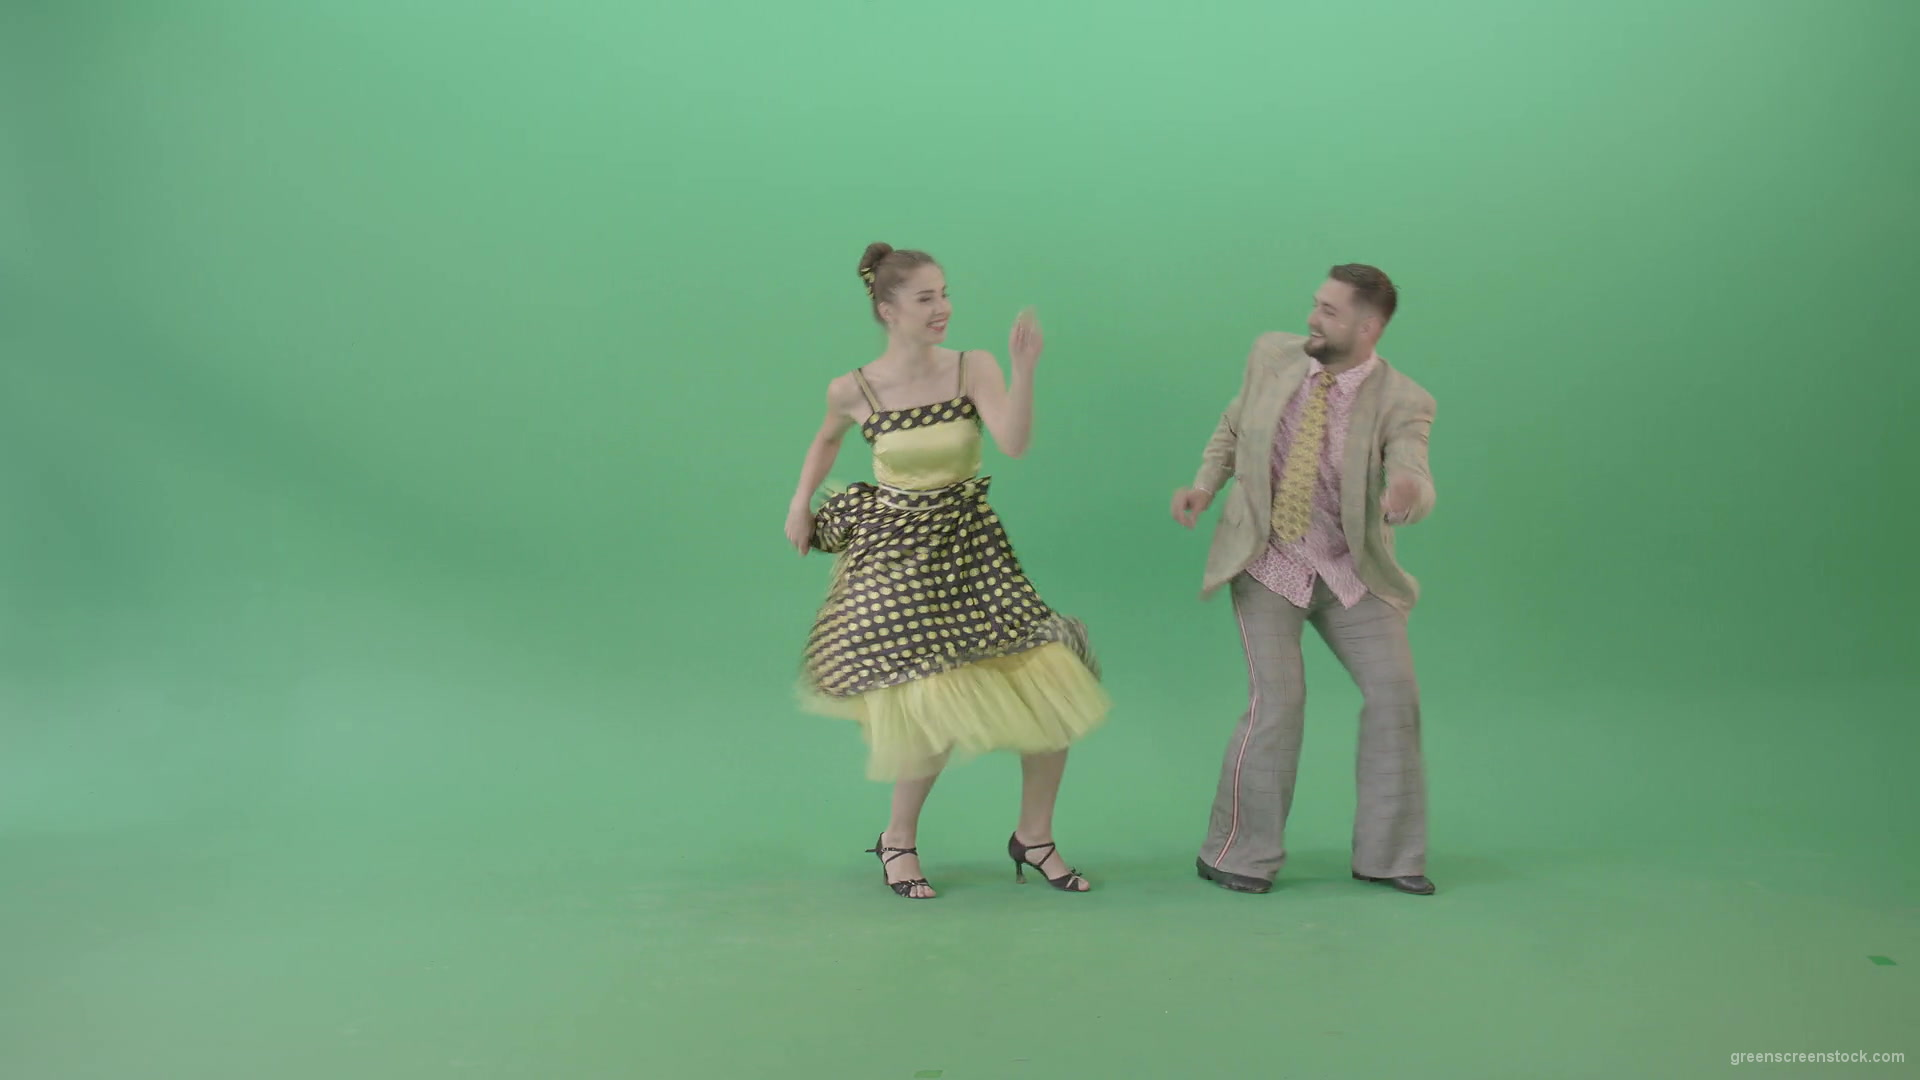 Happy-Man-and-woman-dancing-Boogie-woogie-moves-and-rock-and-roll-over-Green-Screen-4K-Video-Footage-1920_008 Green Screen Stock